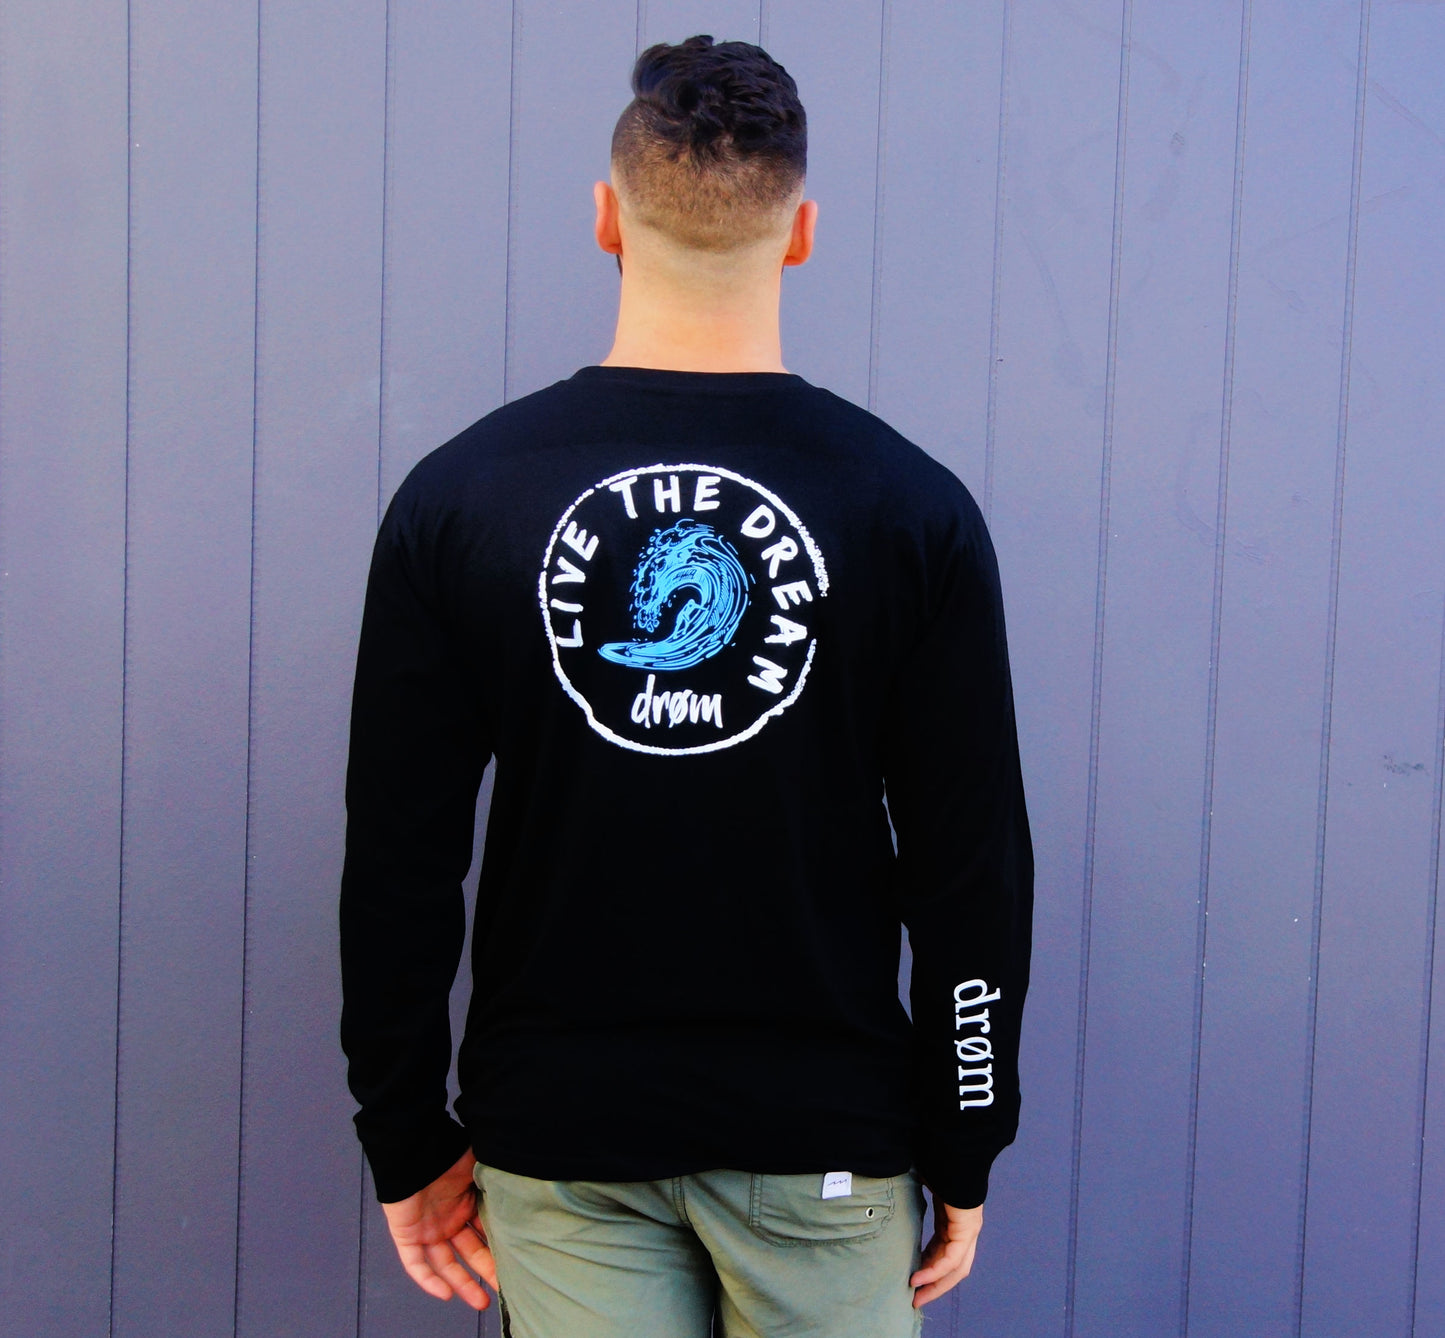 NEW- Long Sleeve - Surfer blue and white design